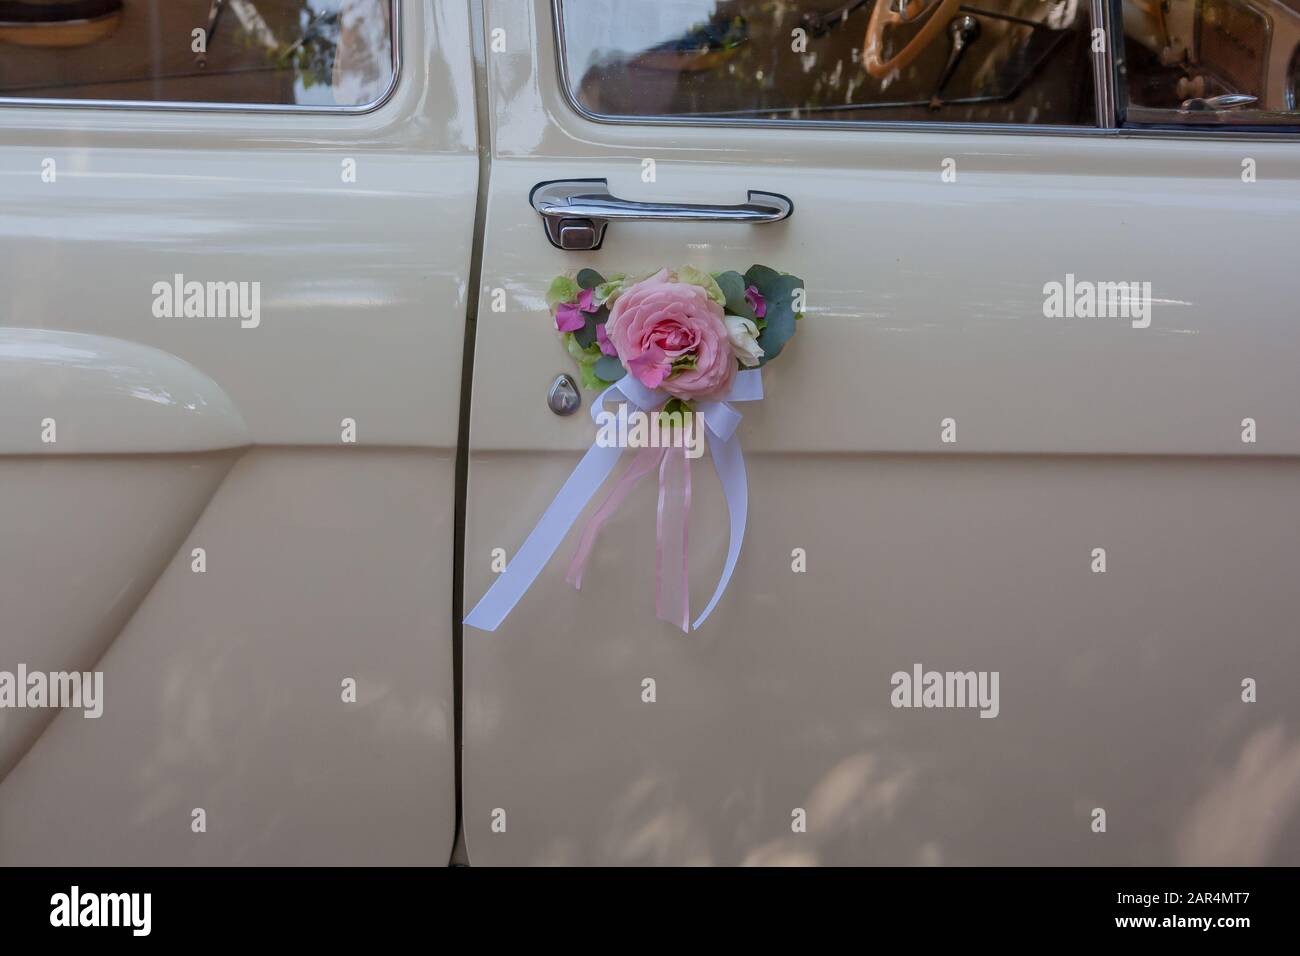 Wedding car with beautiful decorations of pink and orange roses Stock Photo